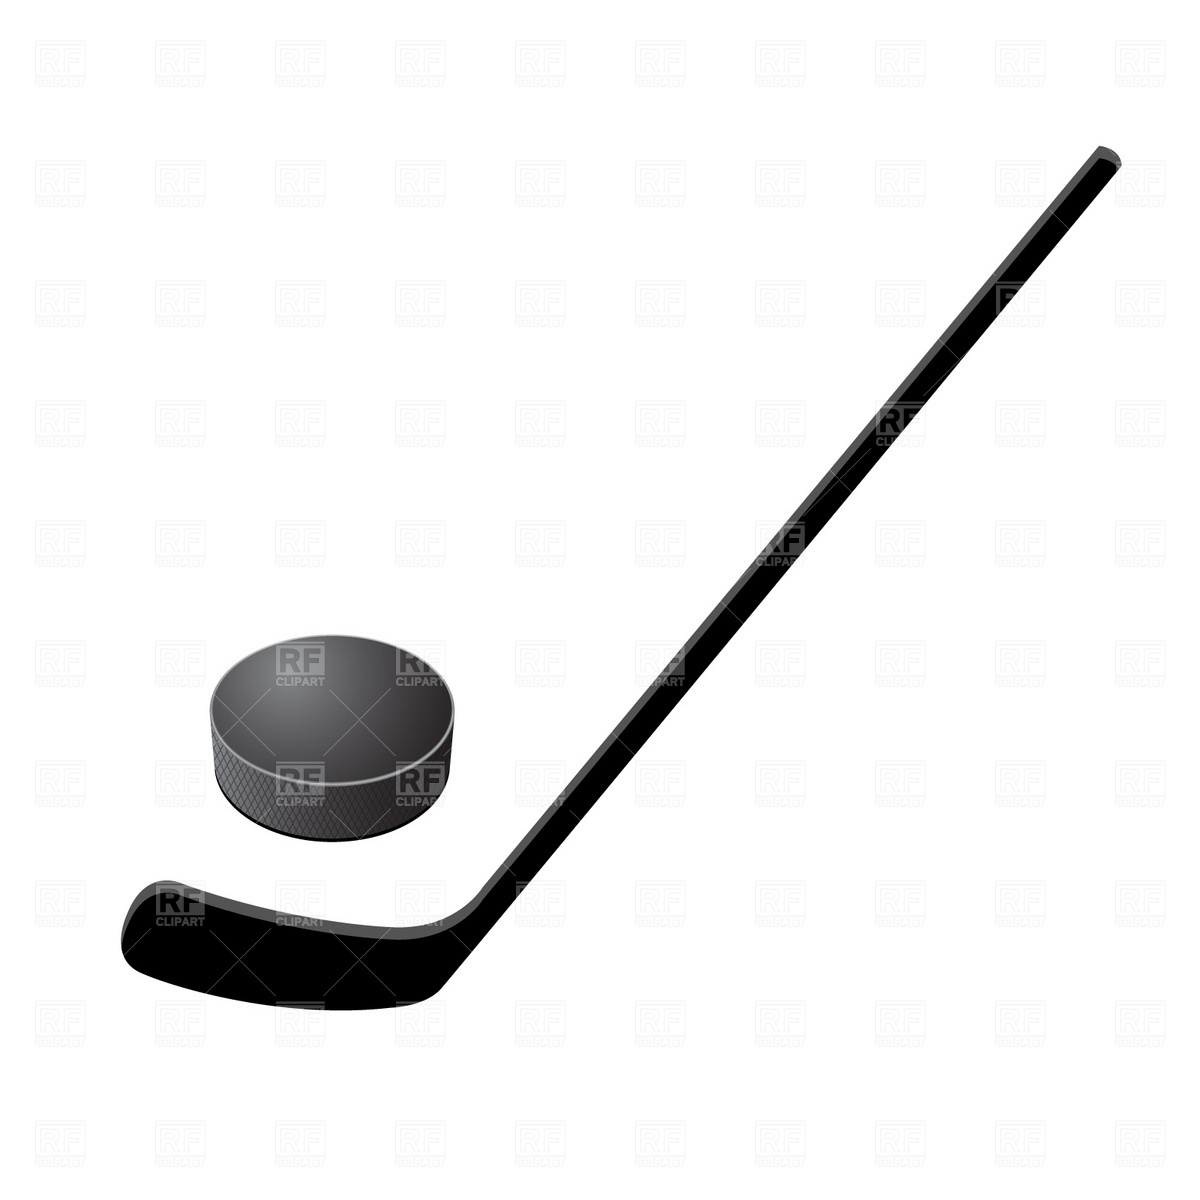 Hockey Stick And Puck Download Free Vector Clipart  Eps 